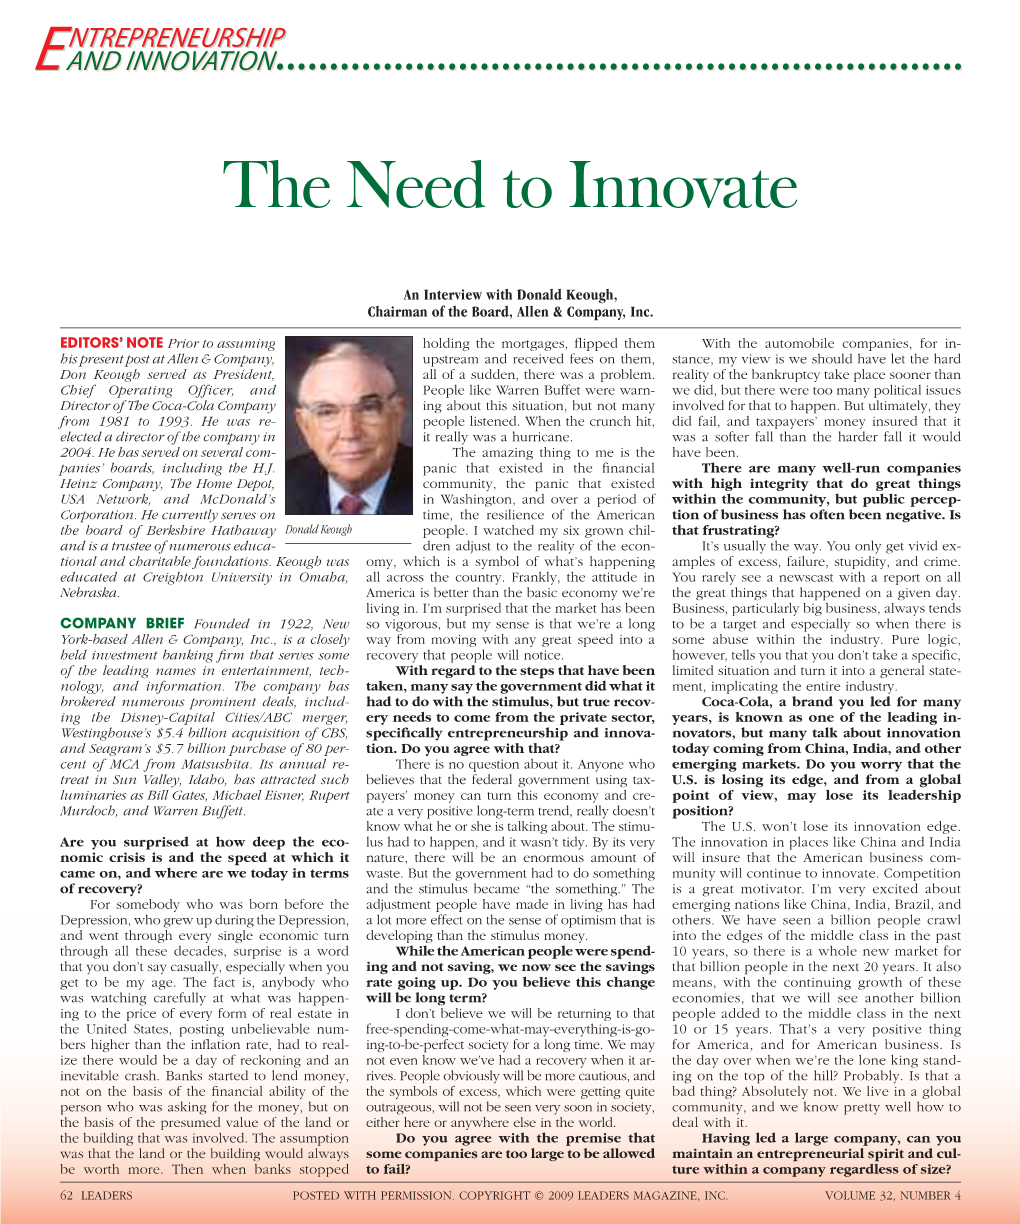 The Need to Innovate